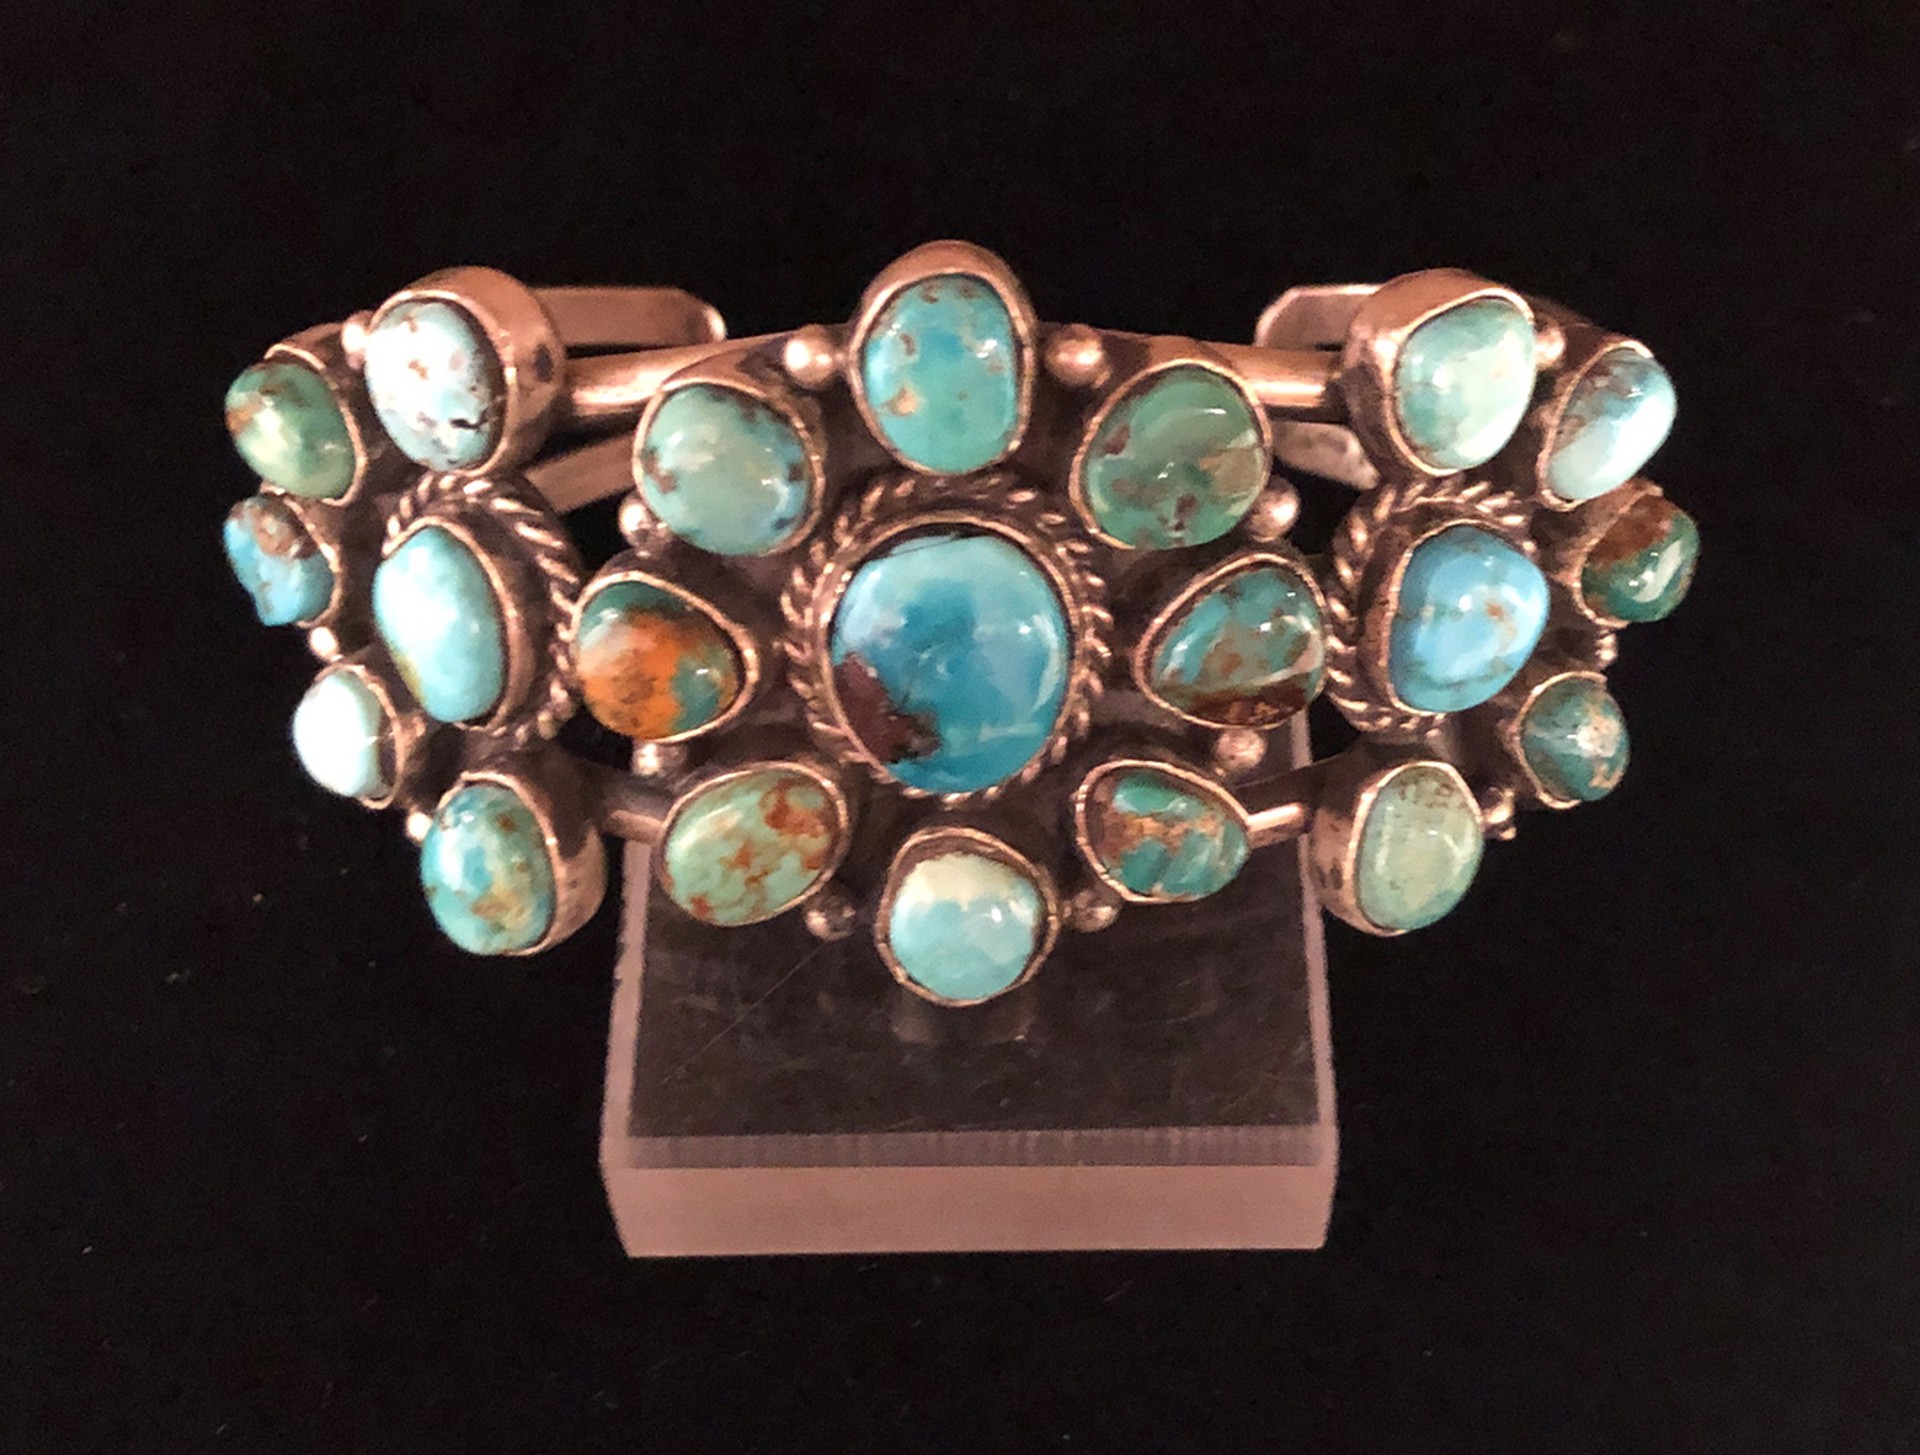 Bezel Set Turquoise Sterling Silver Cuff